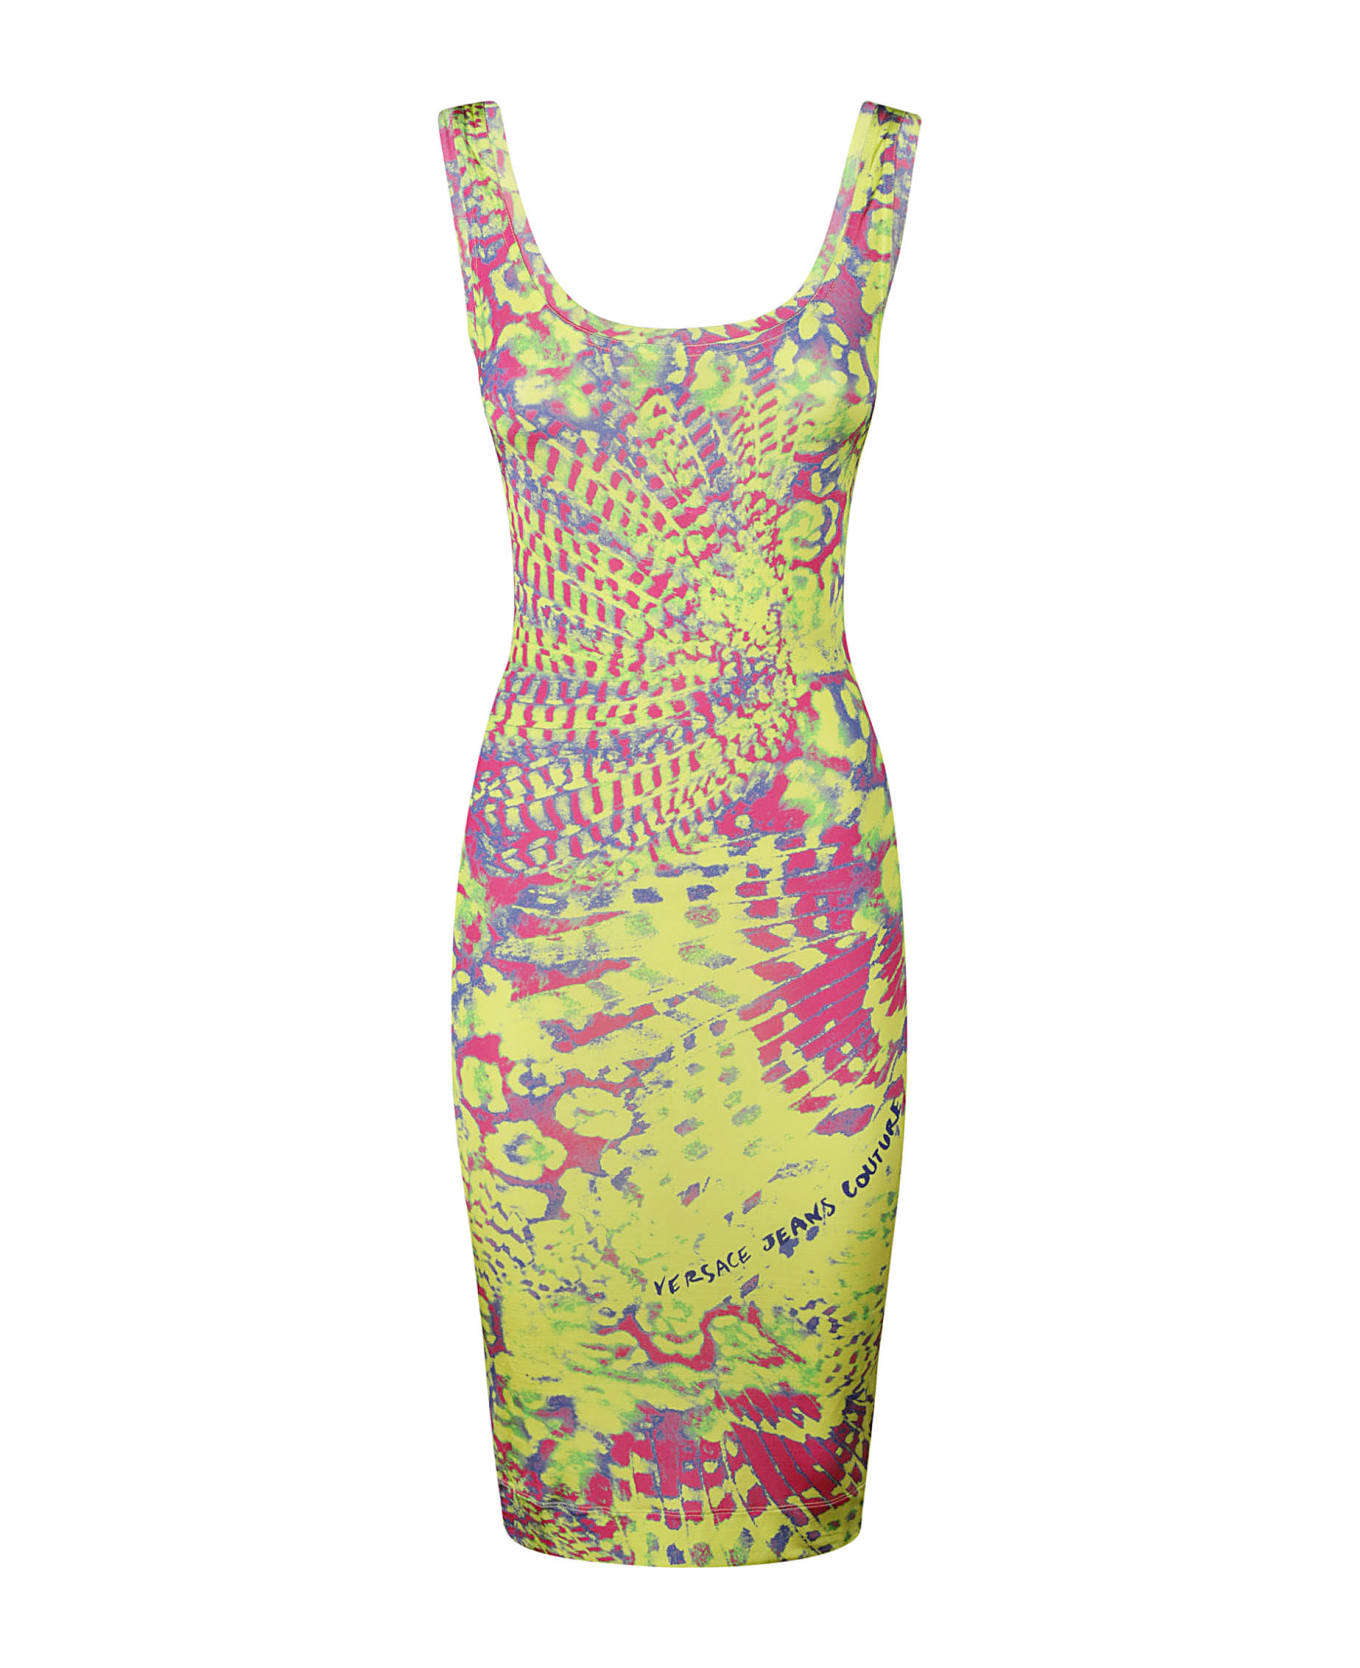 Versace Jeans Couture Pattern-printed Sleeveless Stretched Dress - Acid